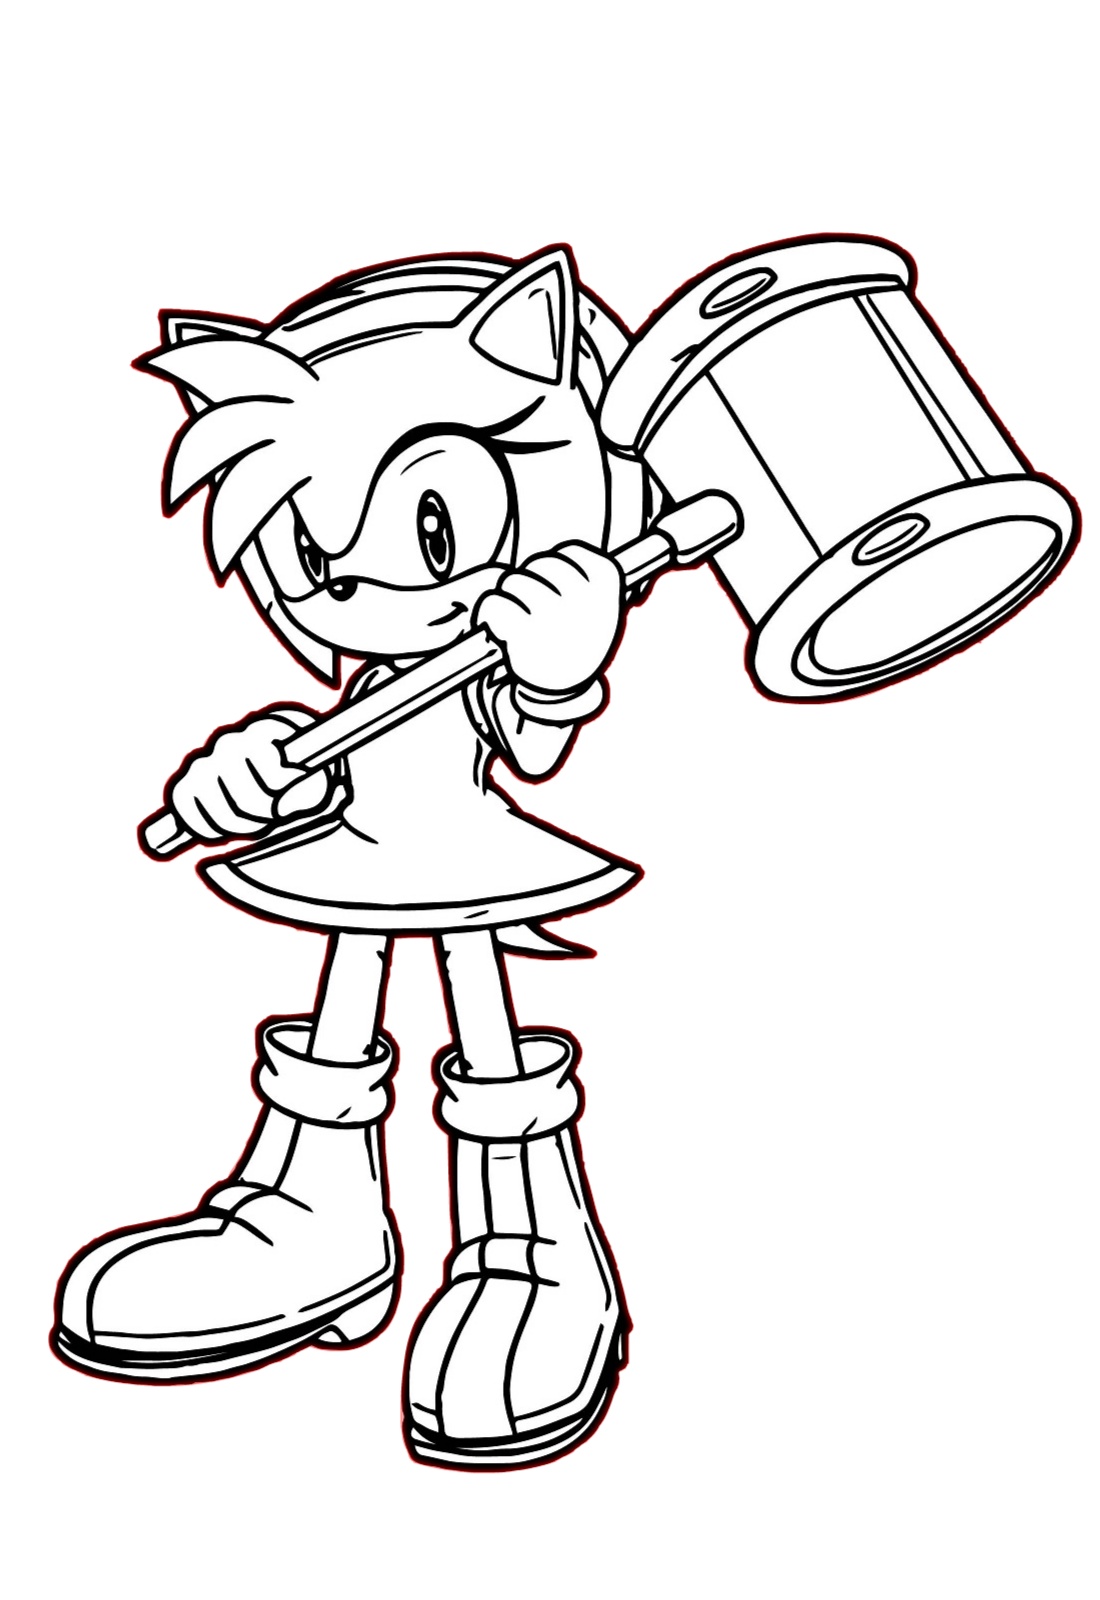 Download 25 Sonic Coloring Pages: Sonic the Hedgehog PDFs Print ...